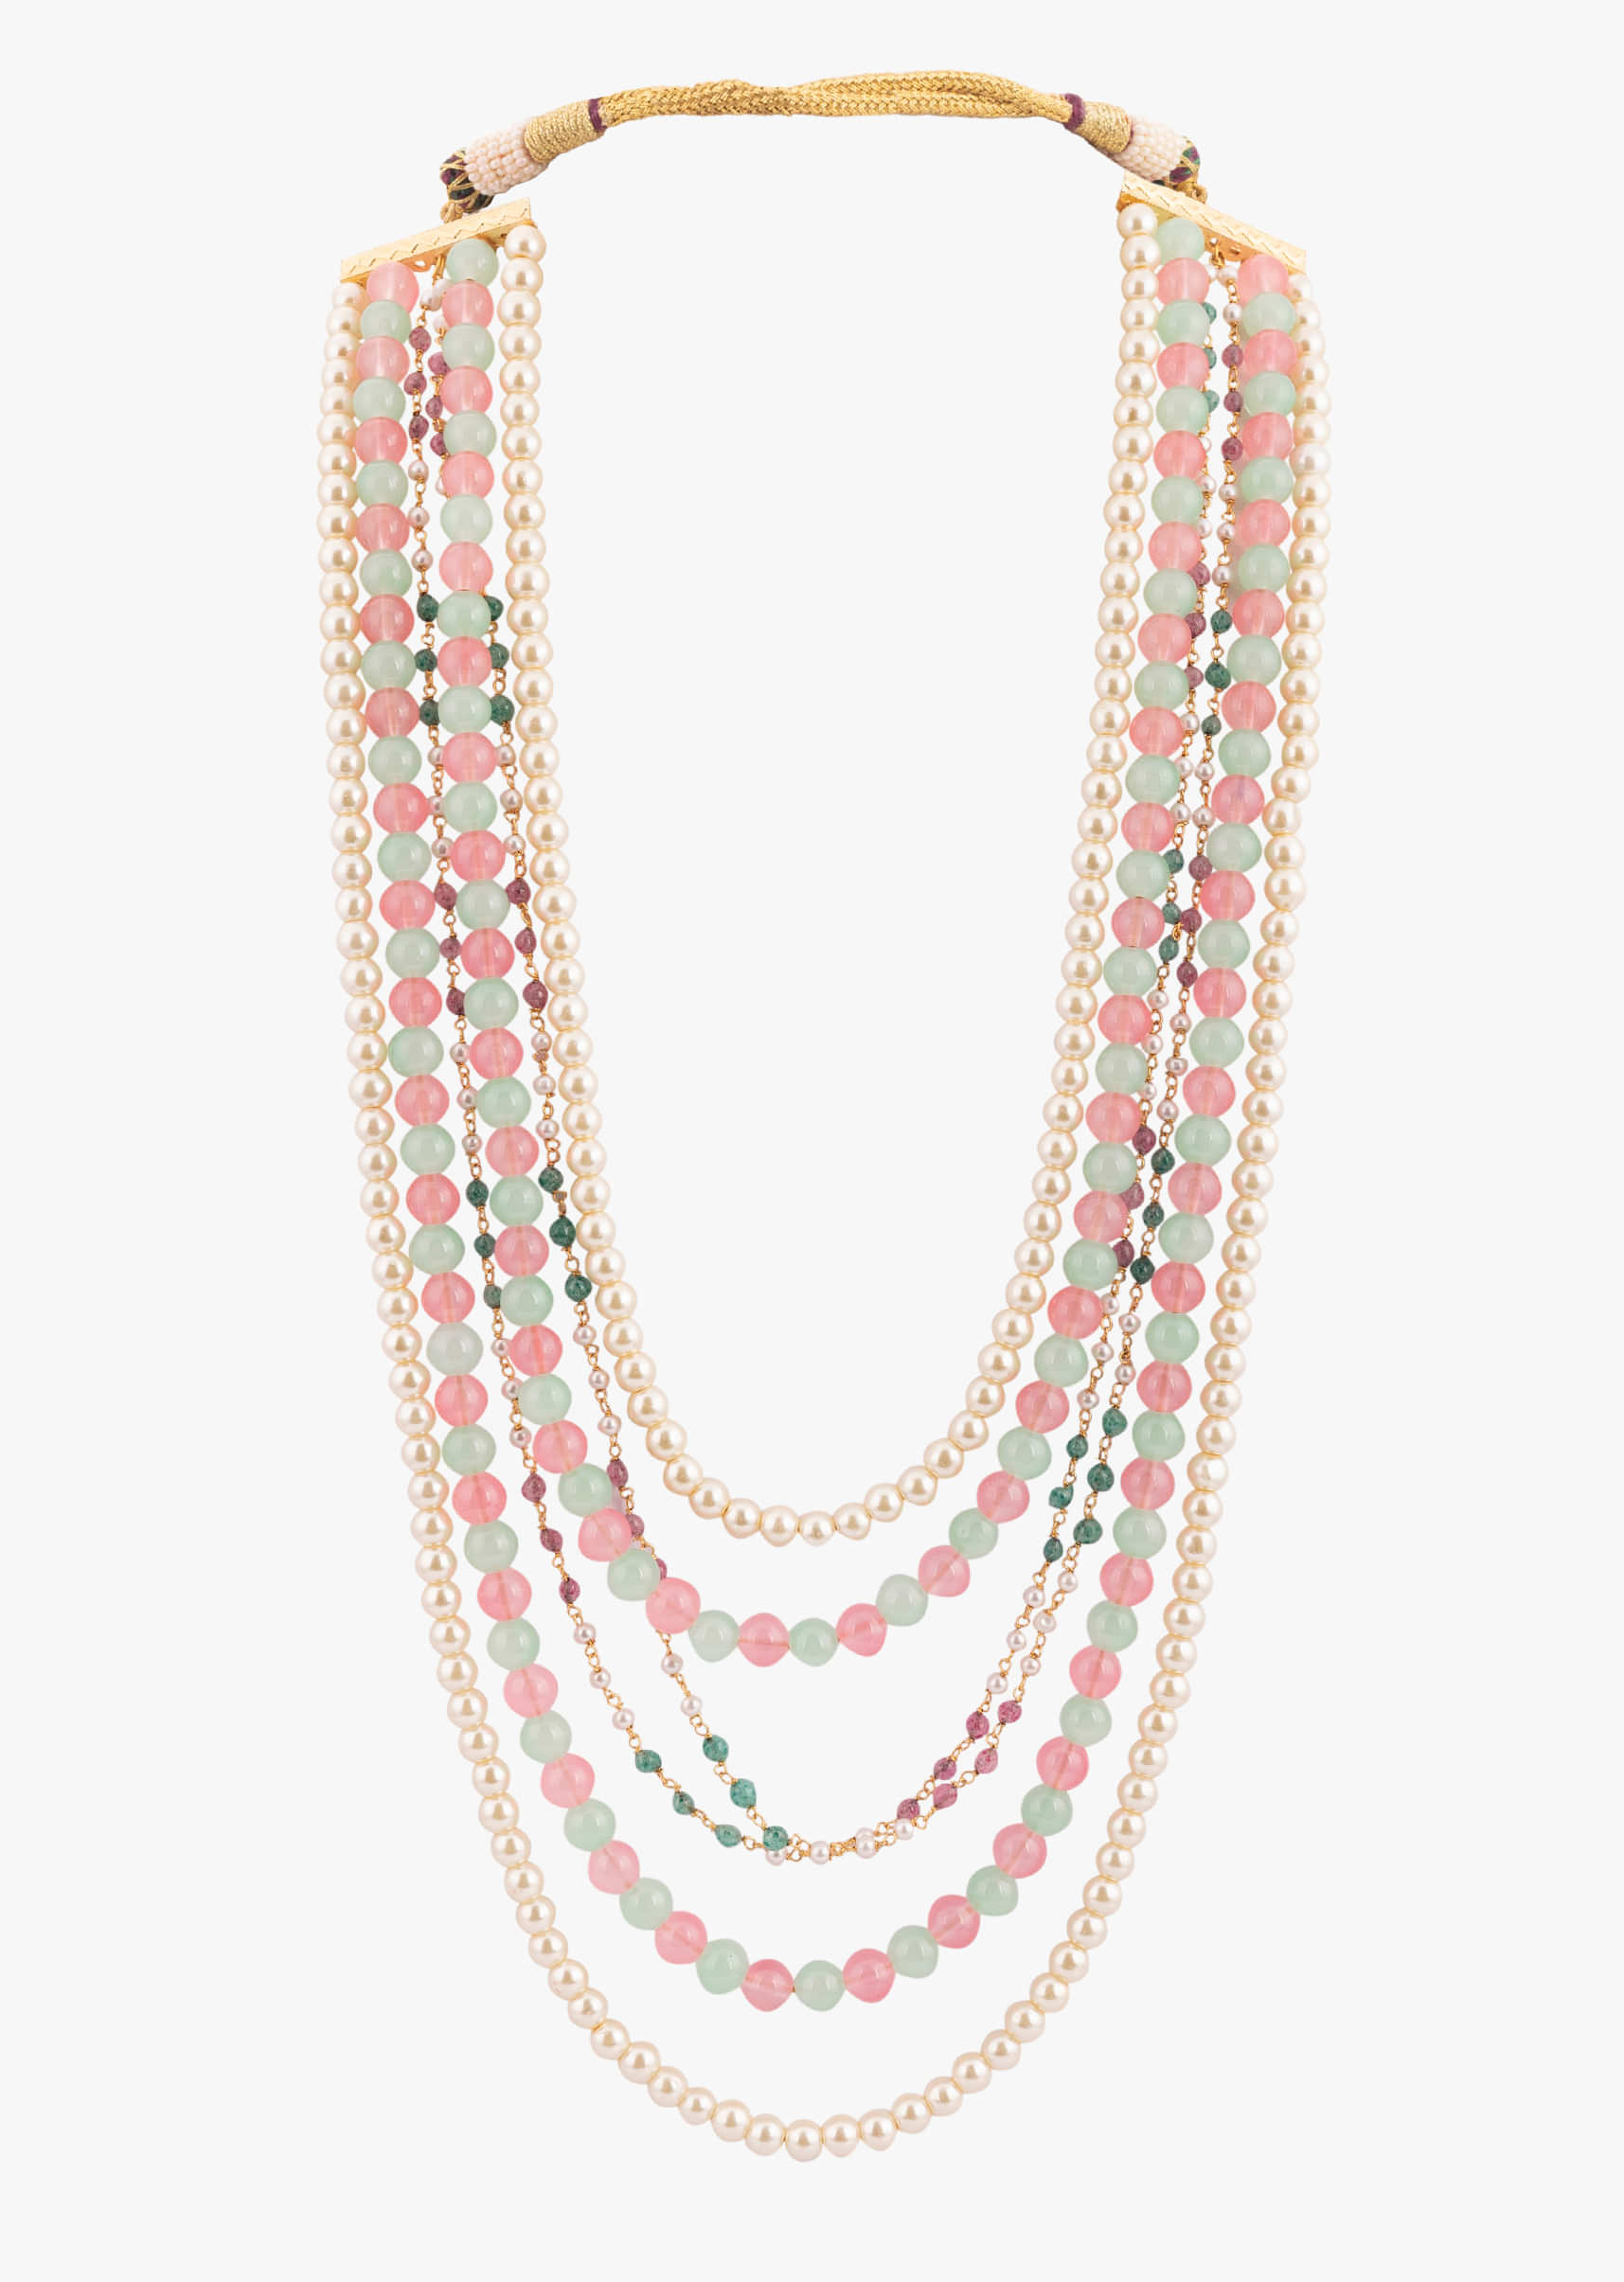 Stylish Pearl And Bead Mala In Green And Pink Shades